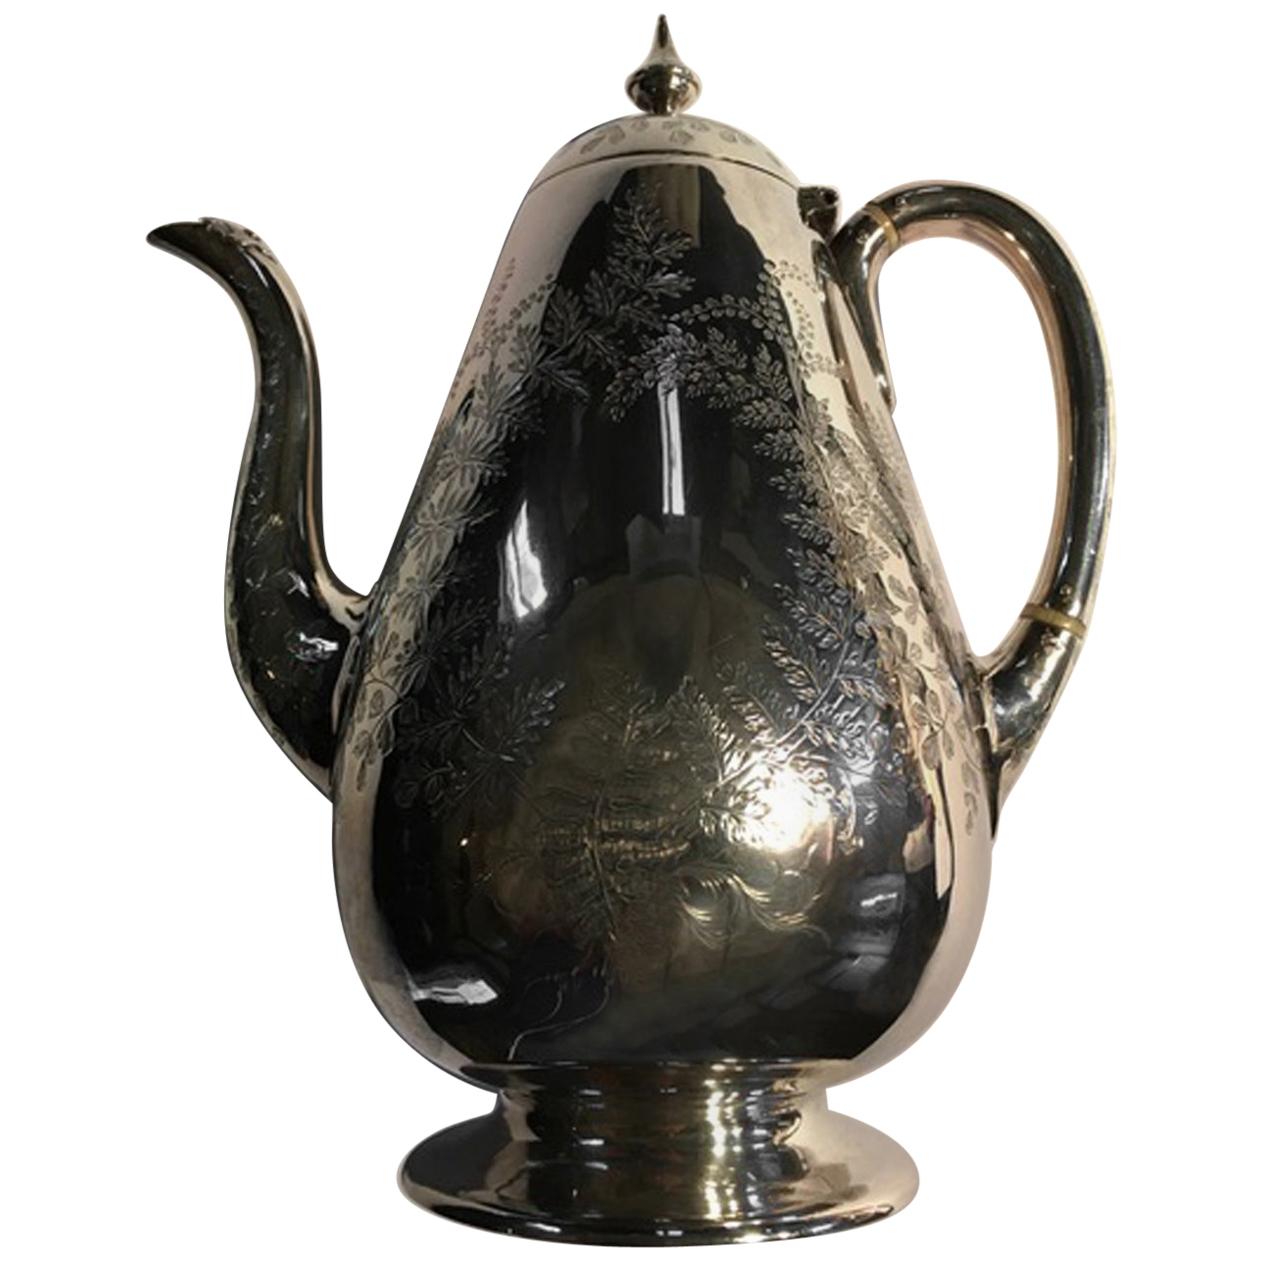 London 18th Century Sterling Silver Teapot